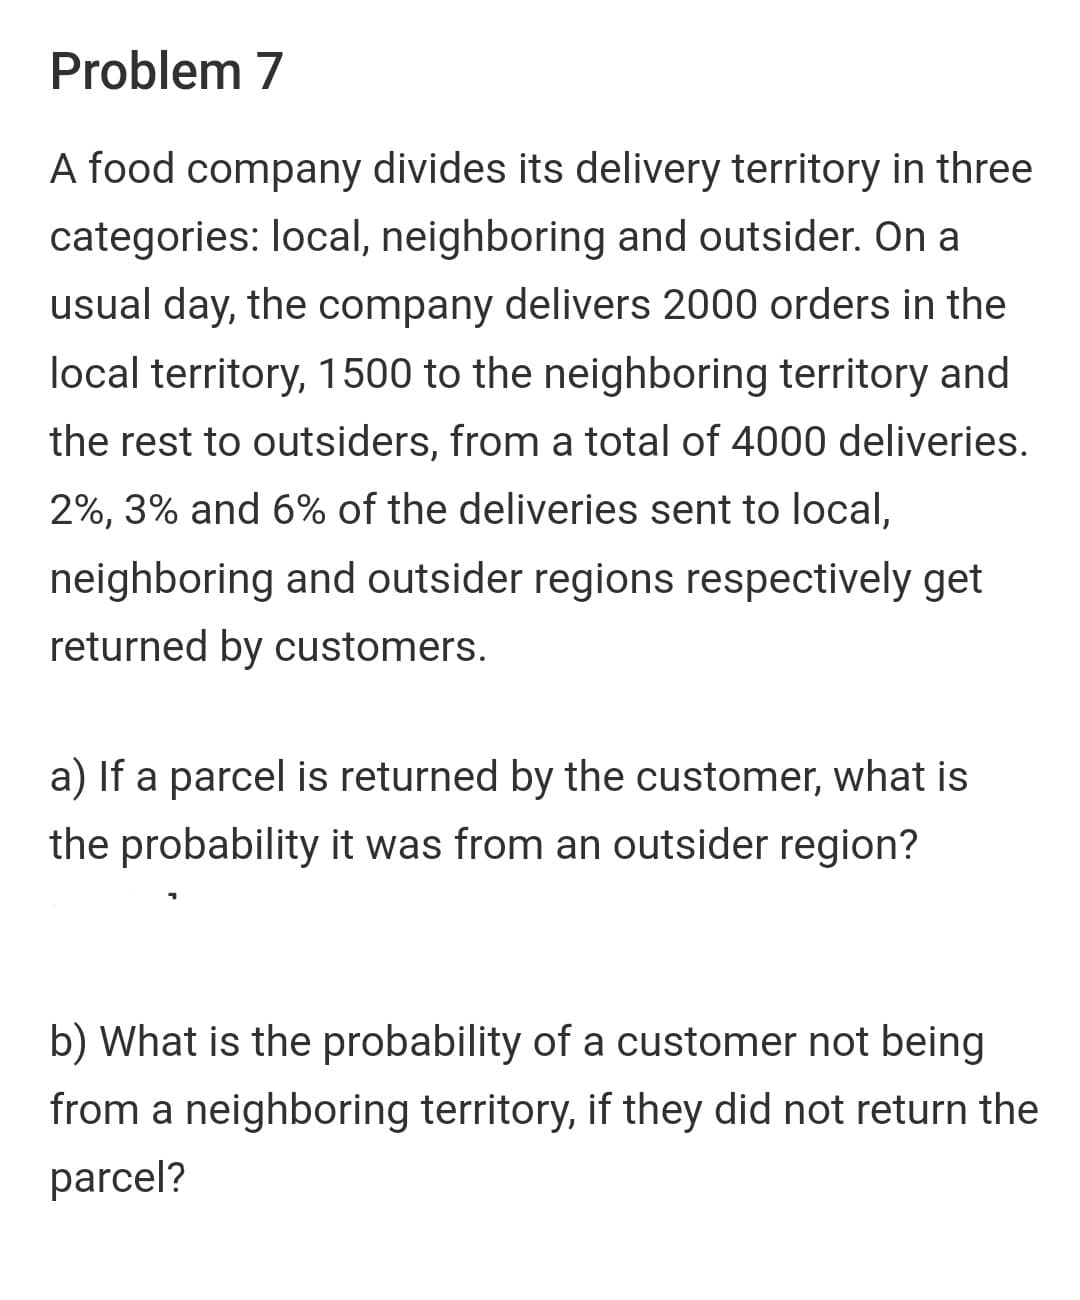 Problem 7
A food company divides its delivery territory in three
categories: local, neighboring and outsider. On a
usual day, the company delivers 2000 orders in the
local territory, 1500 to the neighboring territory and
the rest to outsiders, from a total of 4000 deliveries.
2%, 3% and 6% of the deliveries sent to local,
neighboring and outsider regions respectively get
returned by customers.
a) If a parcel is returned by the customer, what is
the probability it was from an outsider region?
b) What is the probability of a customer not being
from a neighboring territory, if they did not return the
parcel?
